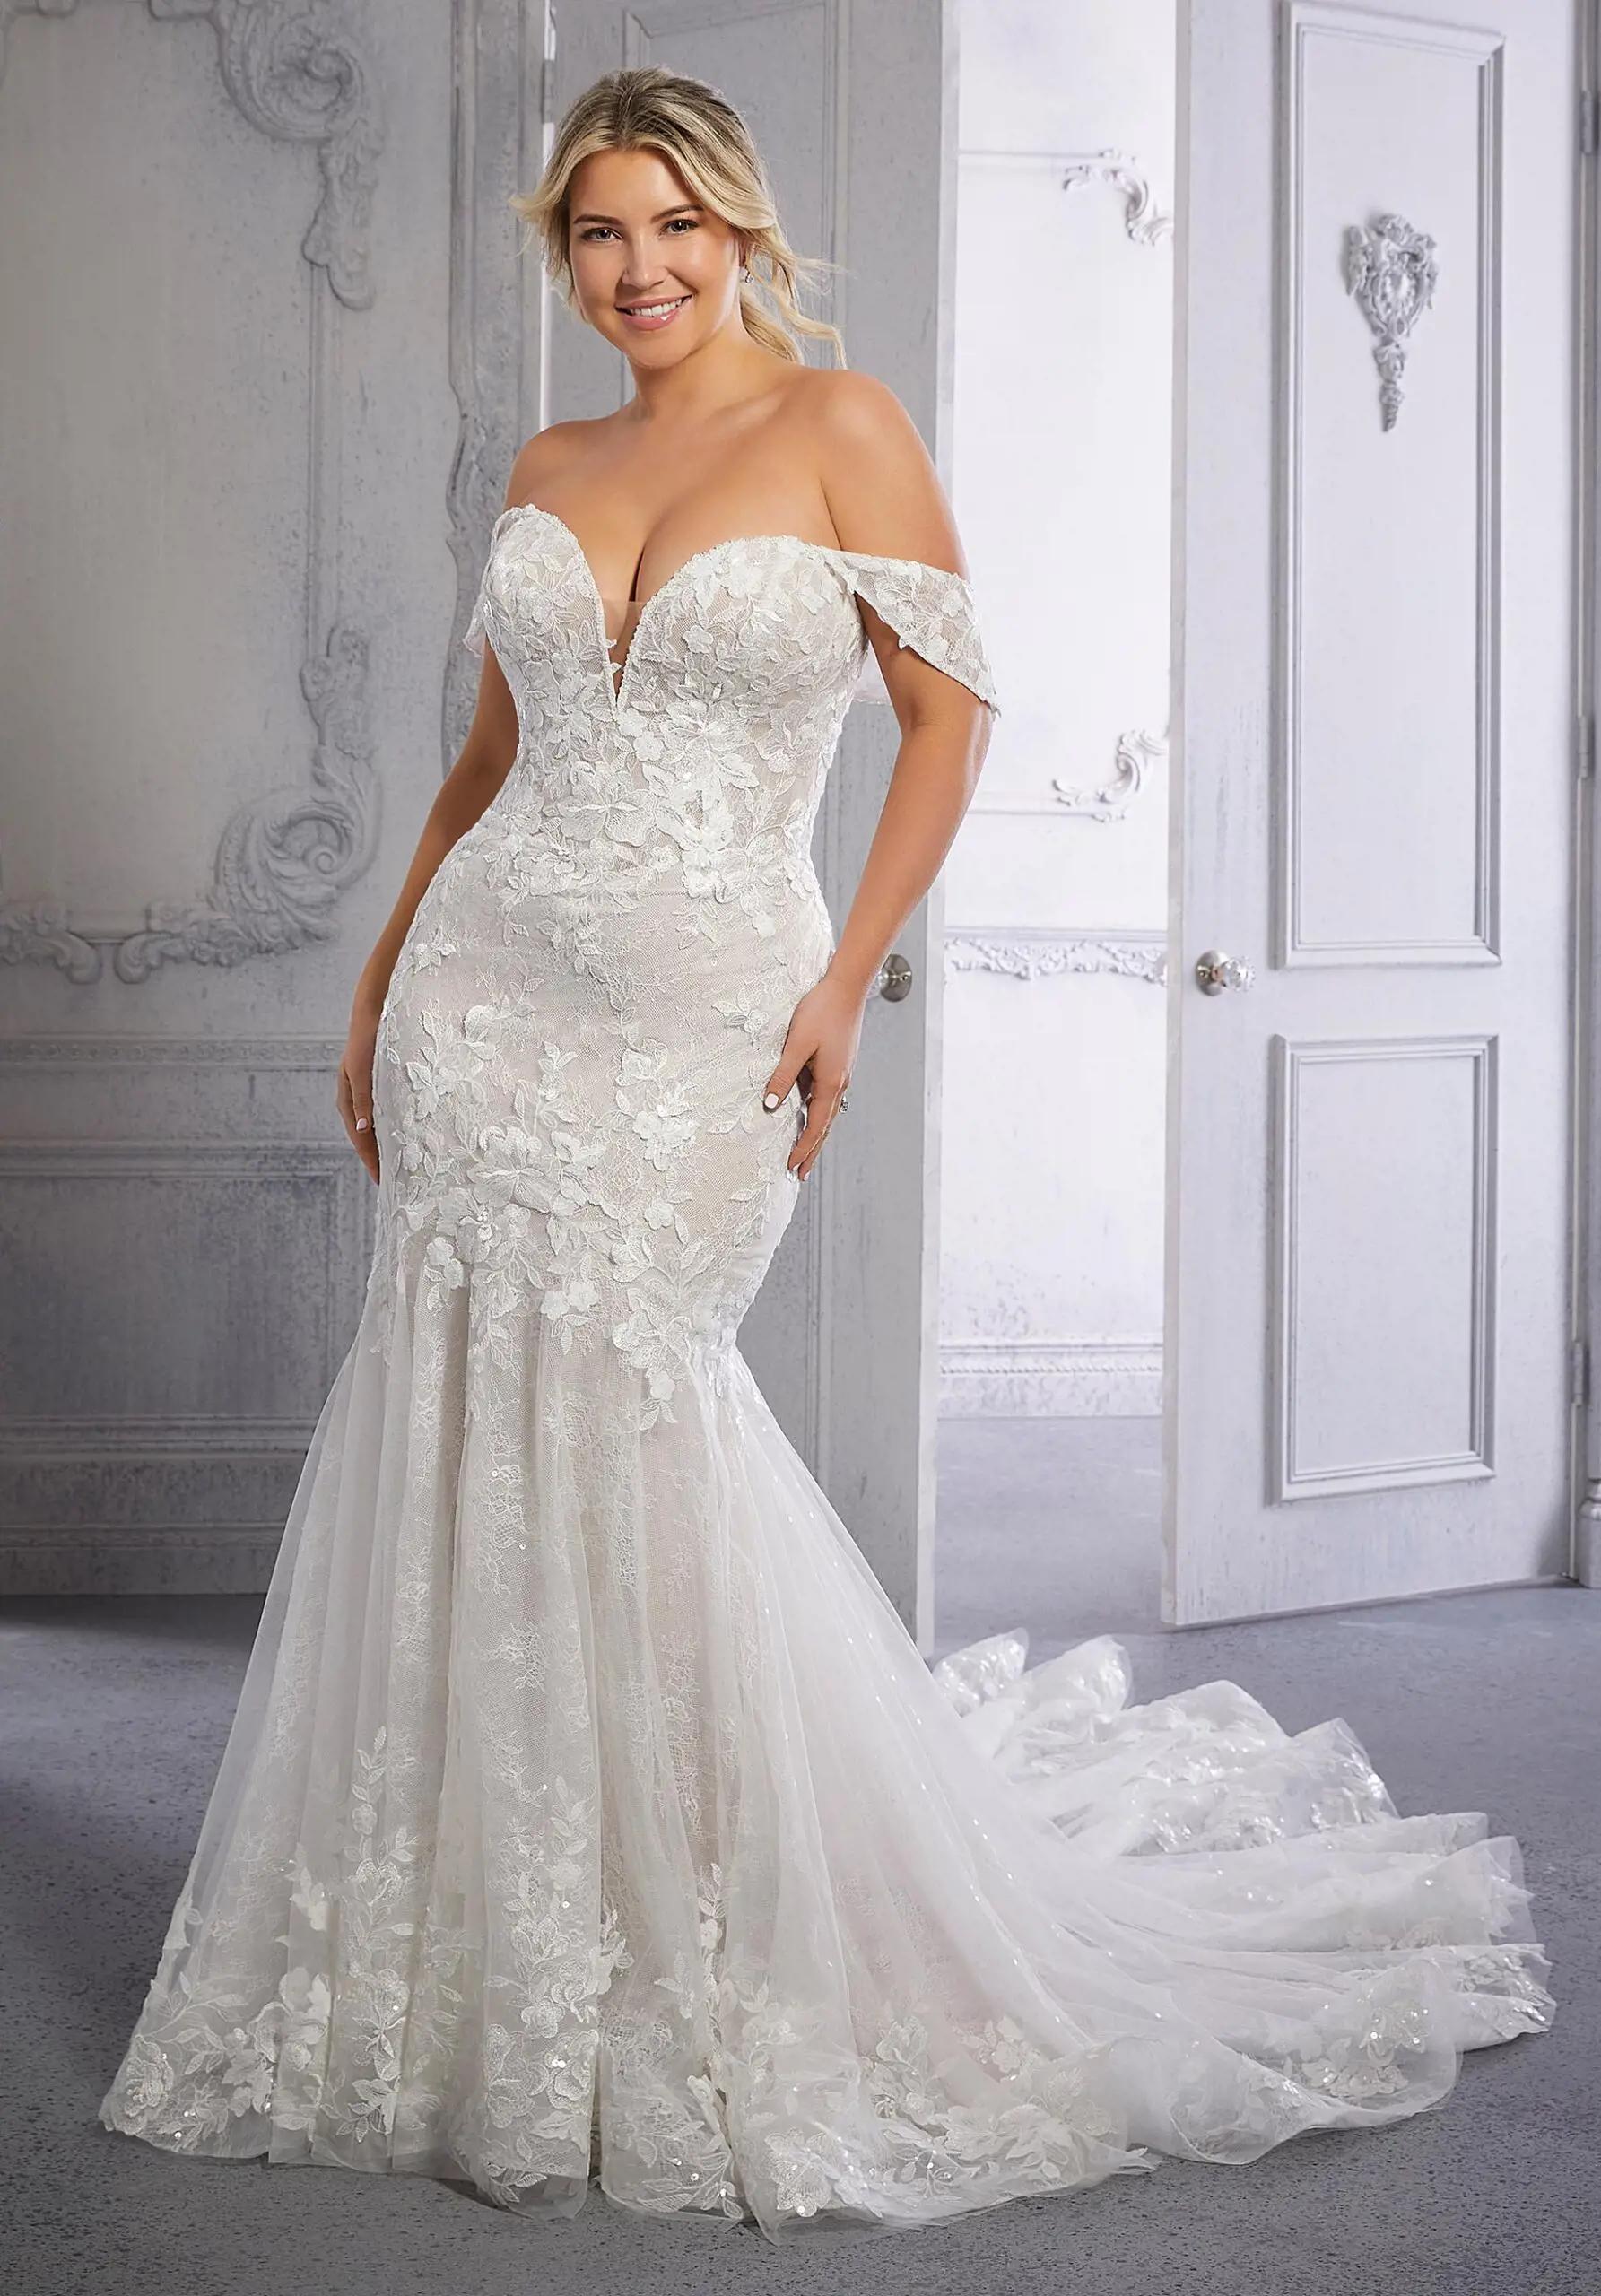 Bridal Dress Shopping Tips For The Curvy Queens Image